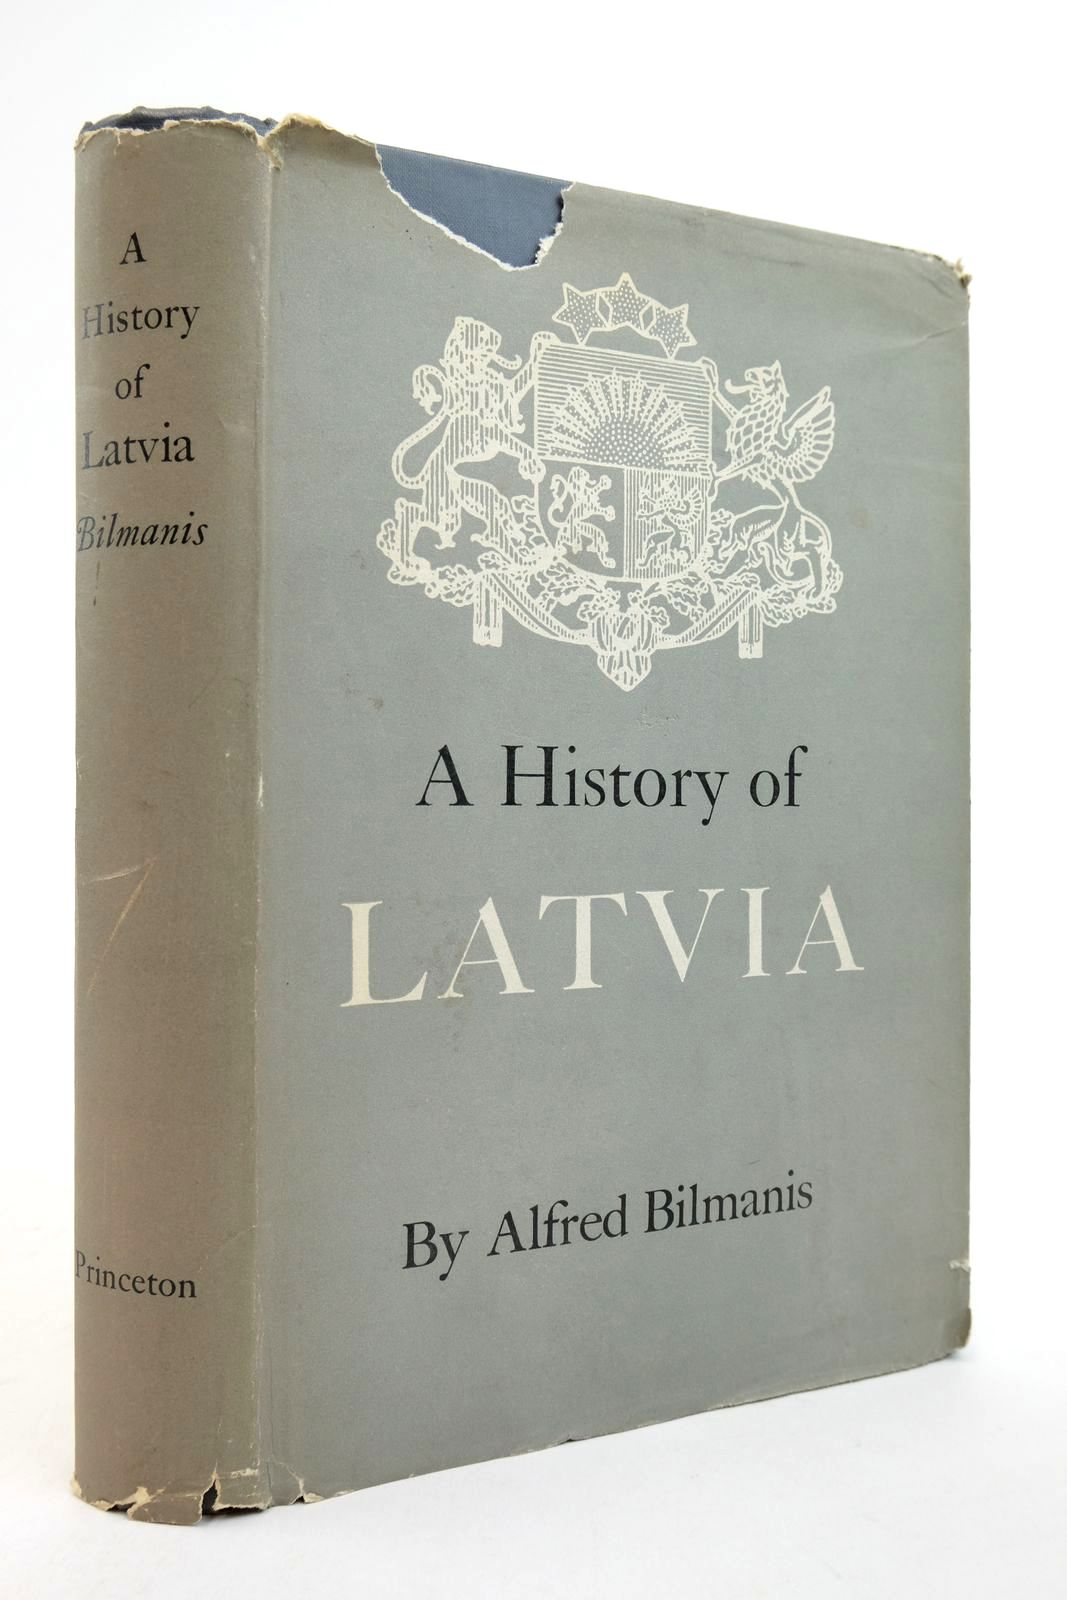 Photo of A HISTORY OF LATVIA written by Bilmanis, Alfred published by Princeton University Press (STOCK CODE: 1323862)  for sale by Stella & Rose's Books